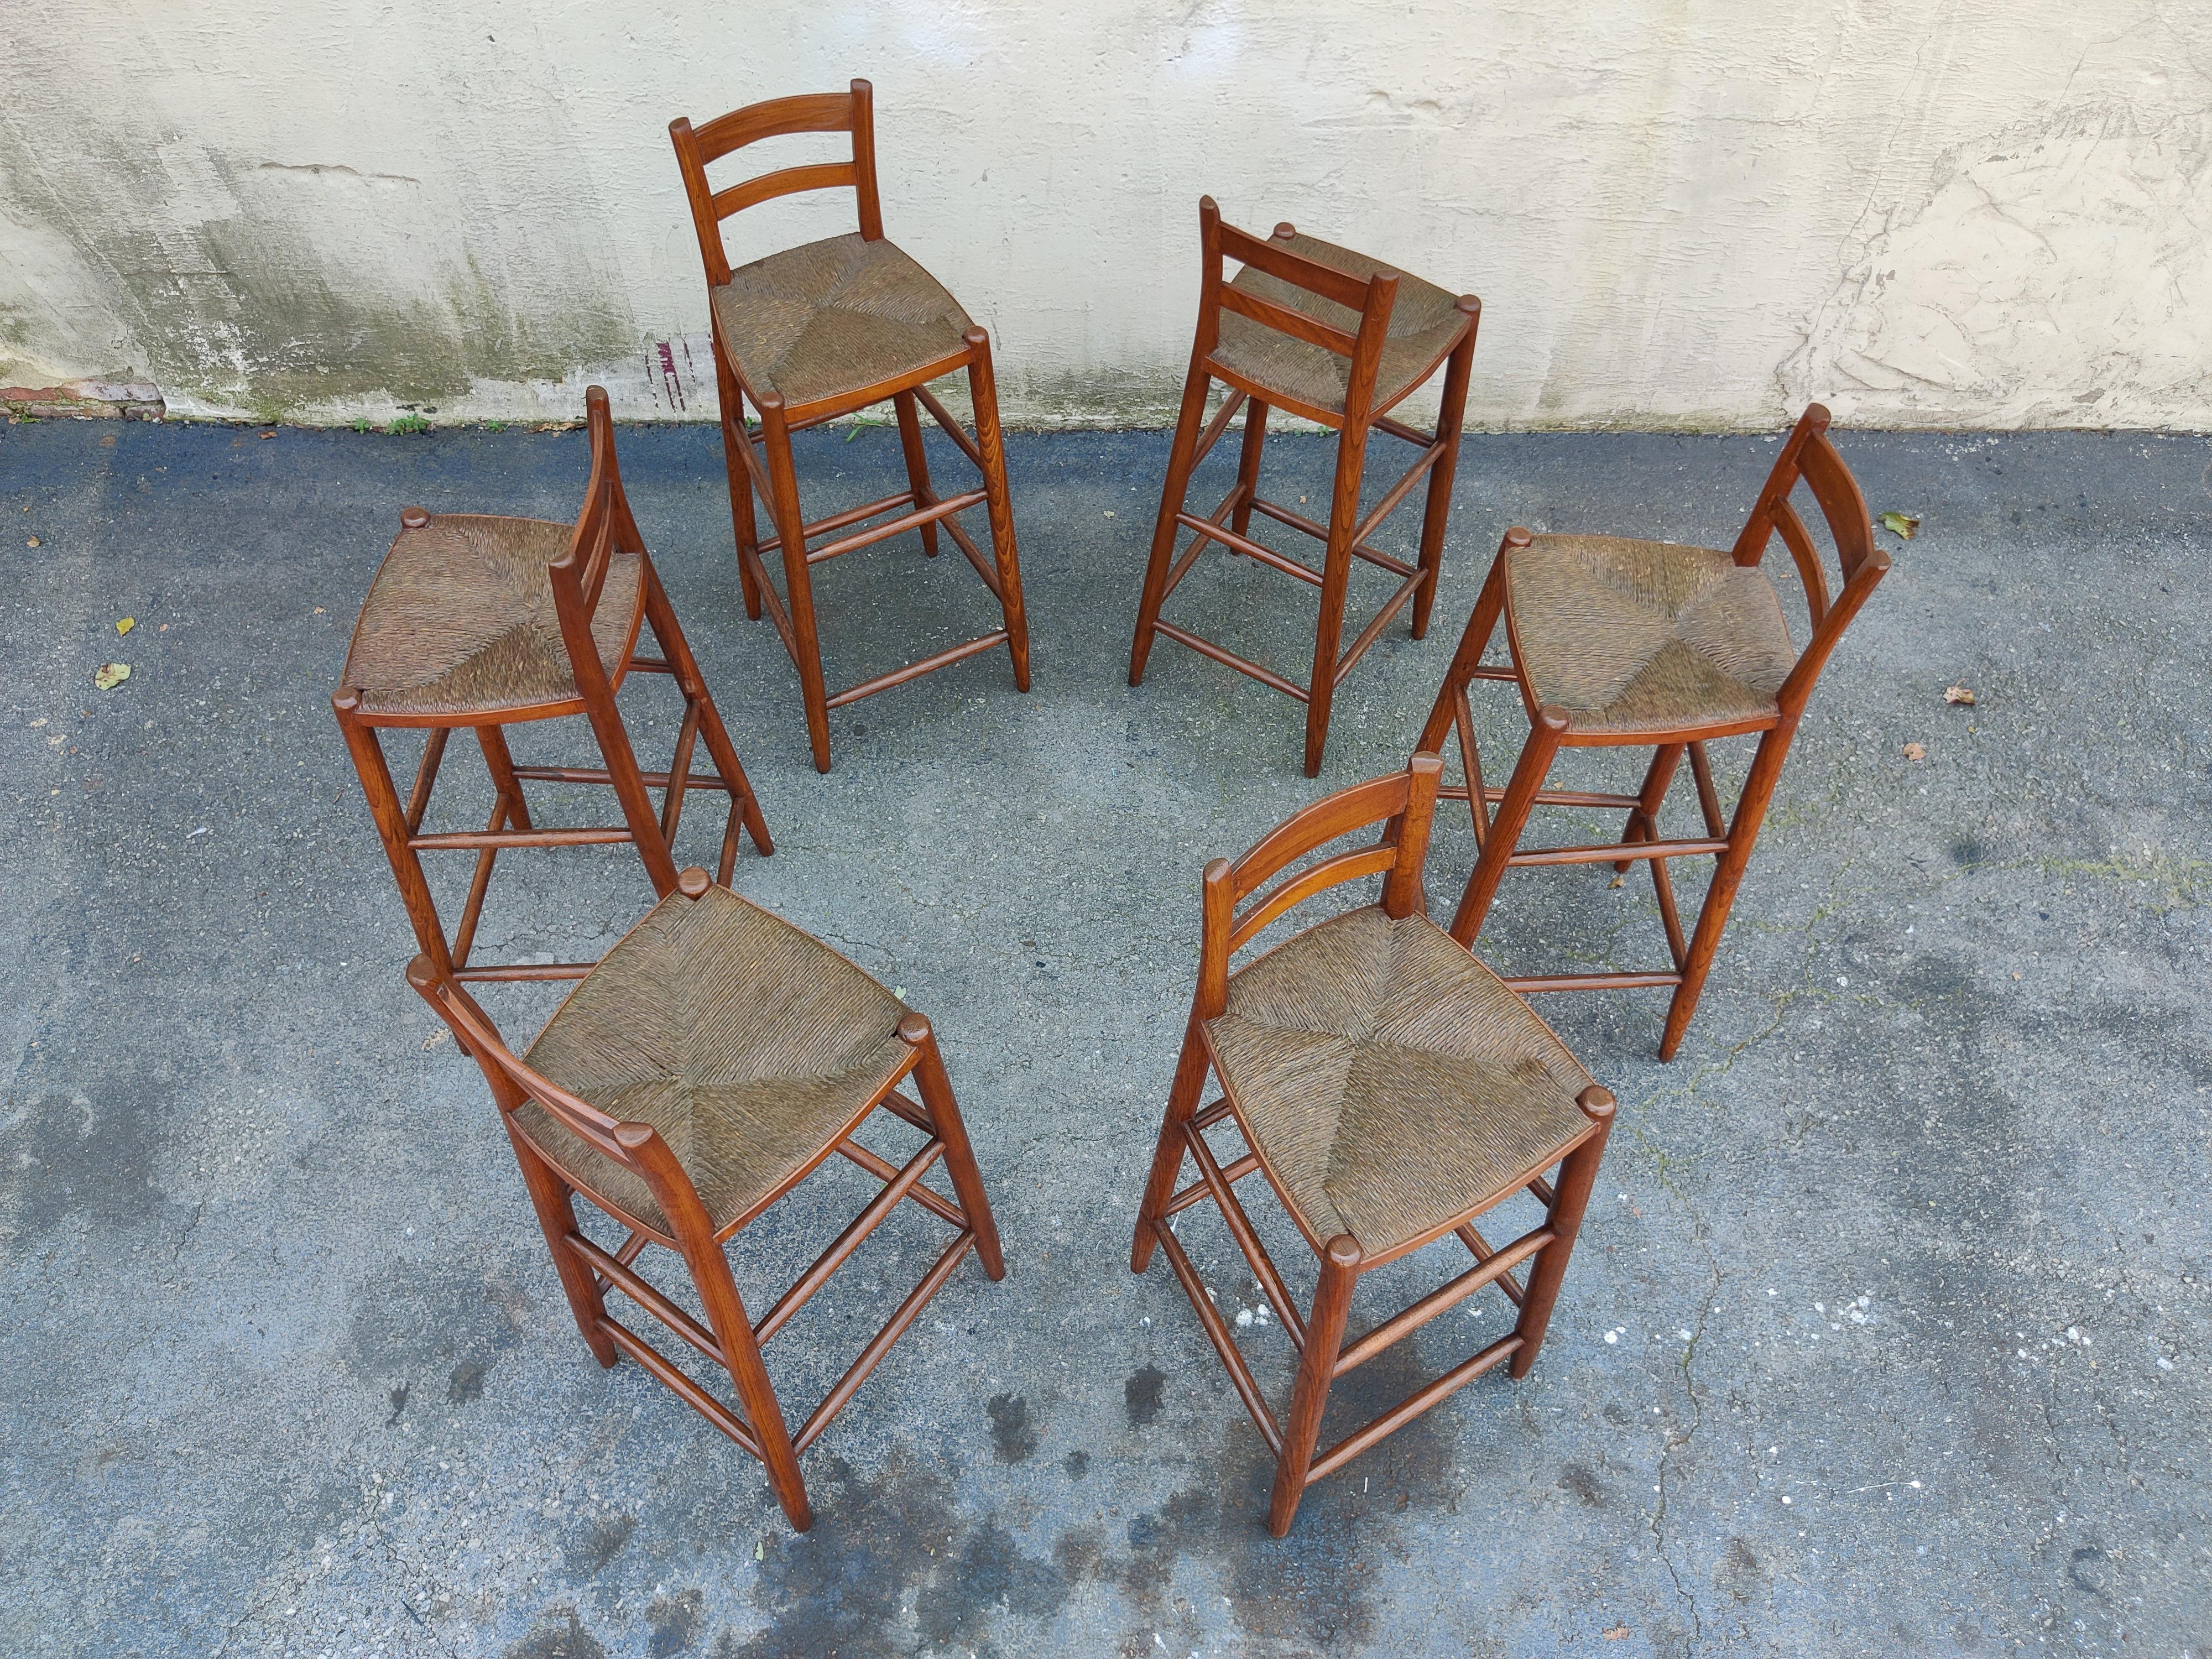 This handsome set of stools were made in the 1970s after the surge in popularity of Danish designers like Hans J. Wegner. Made with oak frames, teak slats, and a comfortable woven rush seat, this set was designed in the style of these sought-after